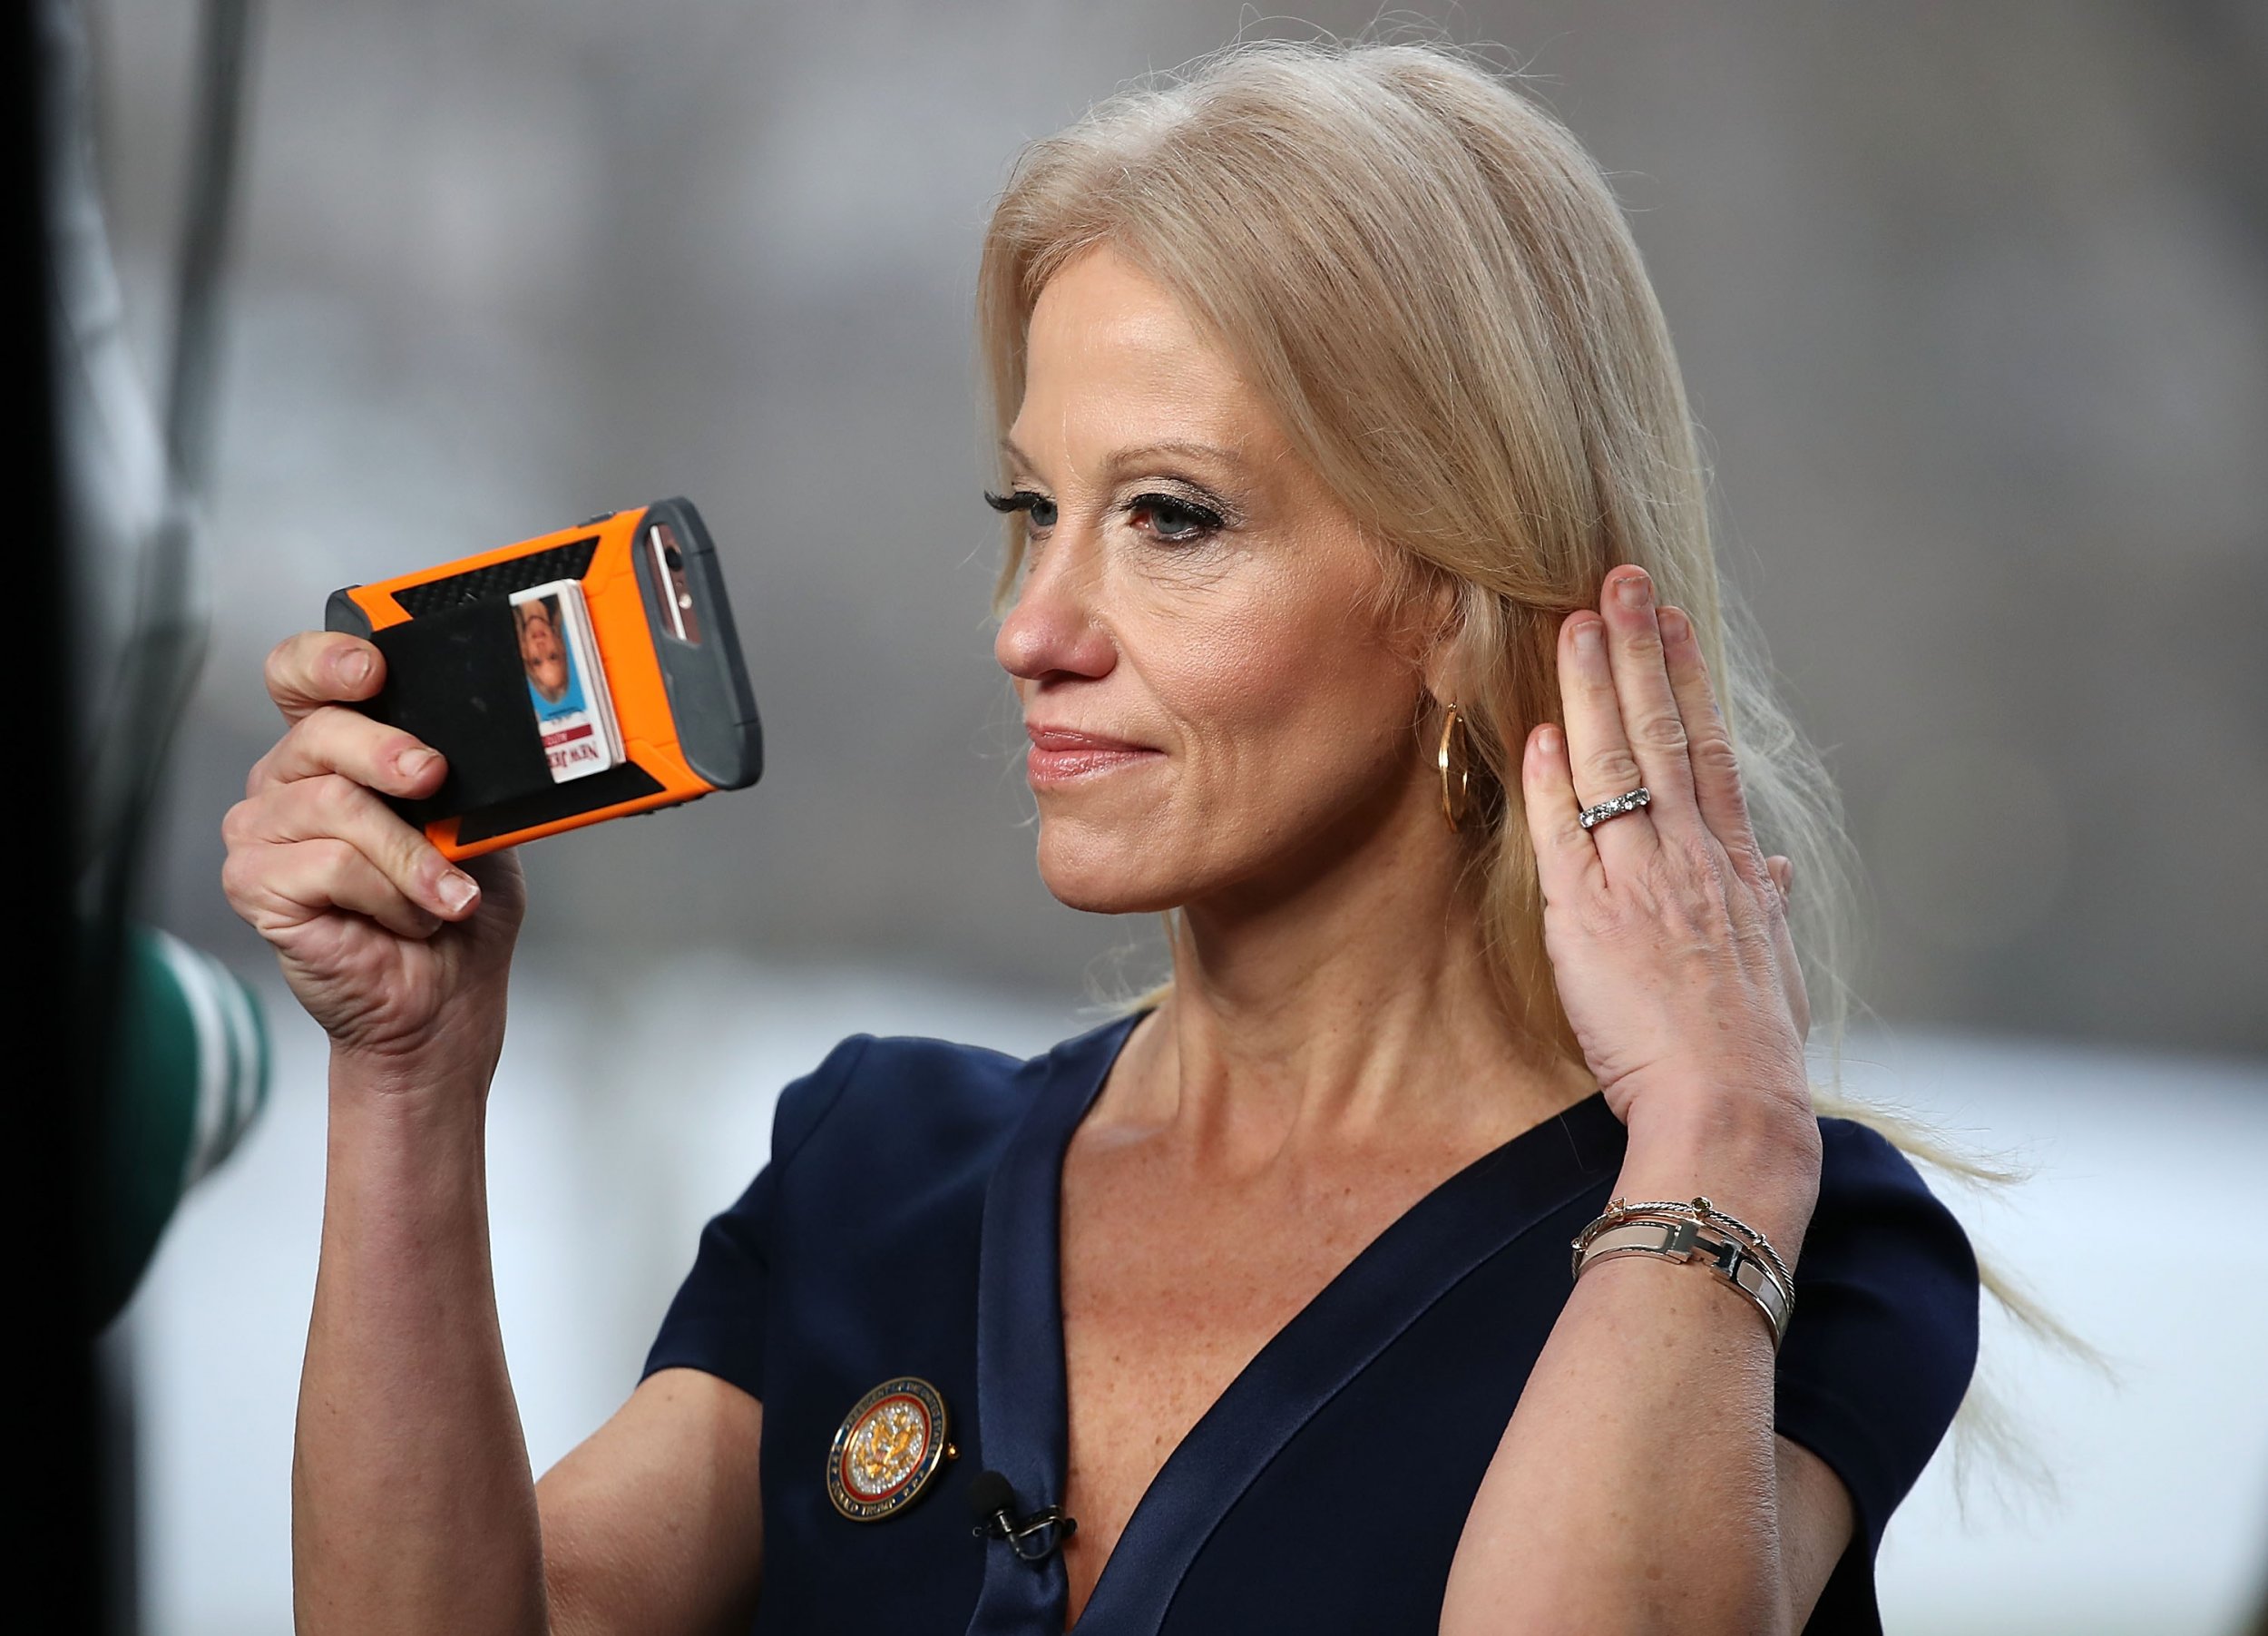 James Comey "swung" election, says Kellyanne Conway, contradictin...